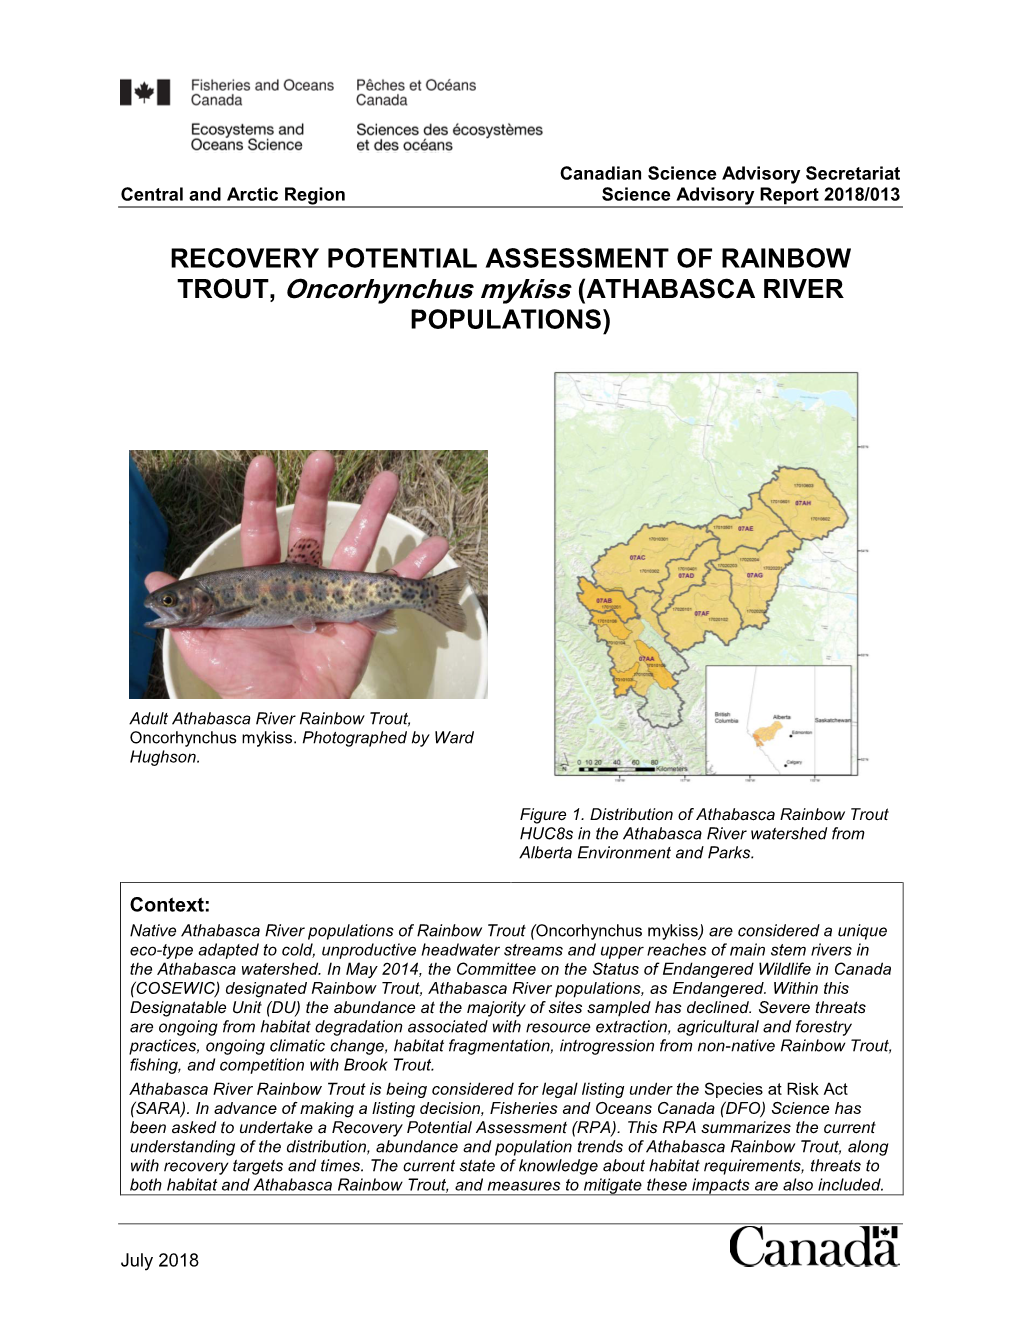 RECOVERY POTENTIAL ASSESSMENT of RAINBOW TROUT, Oncorhynchus Mykiss (ATHABASCA RIVER POPULATIONS)